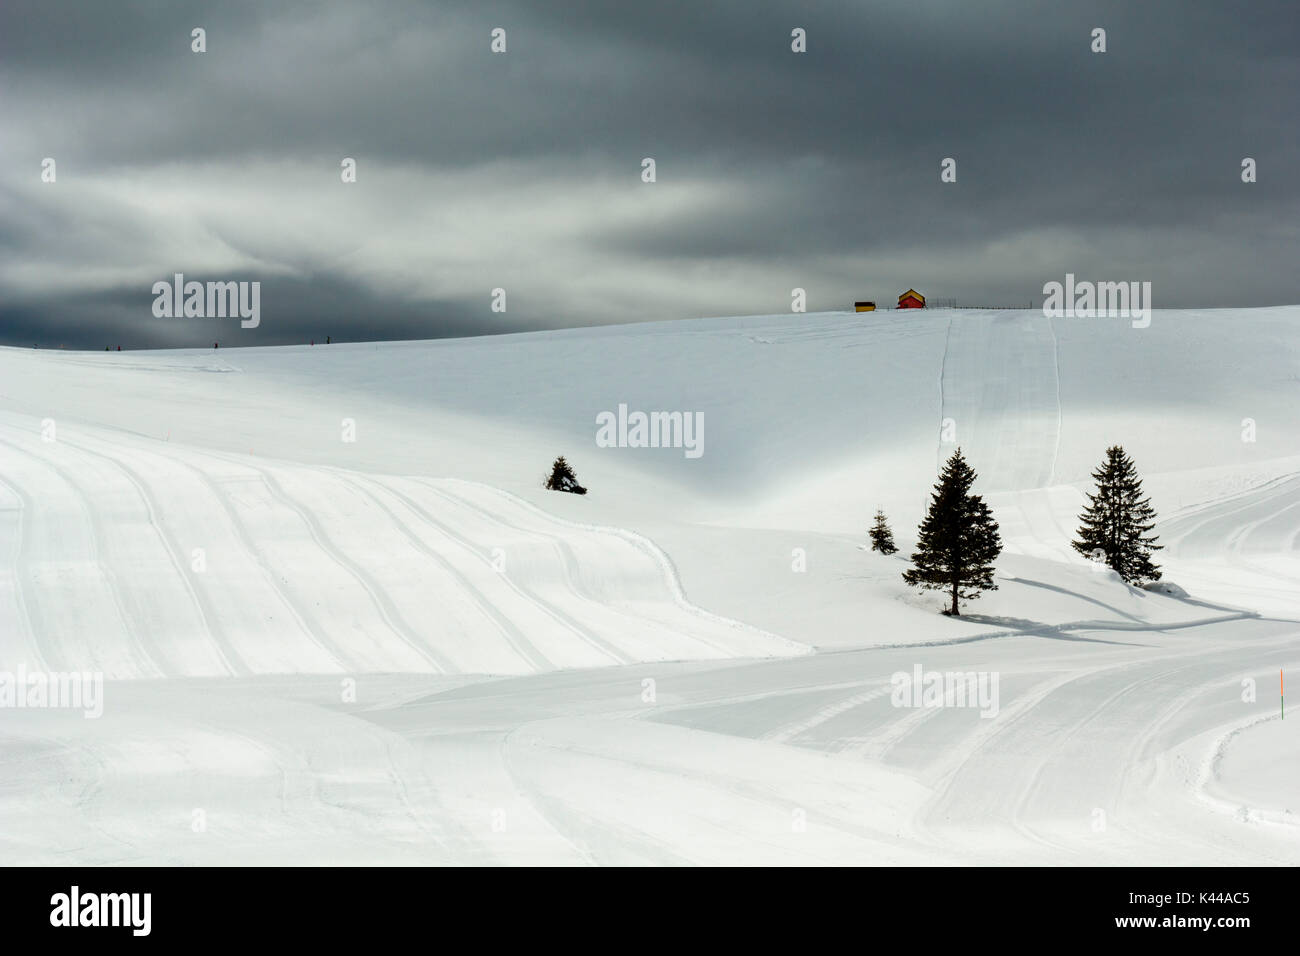 Formica Valley, Altopiano of Asiago, Province of Vicenza, Veneto, Italy. Pine trees and ski slopes before the storm. Stock Photo